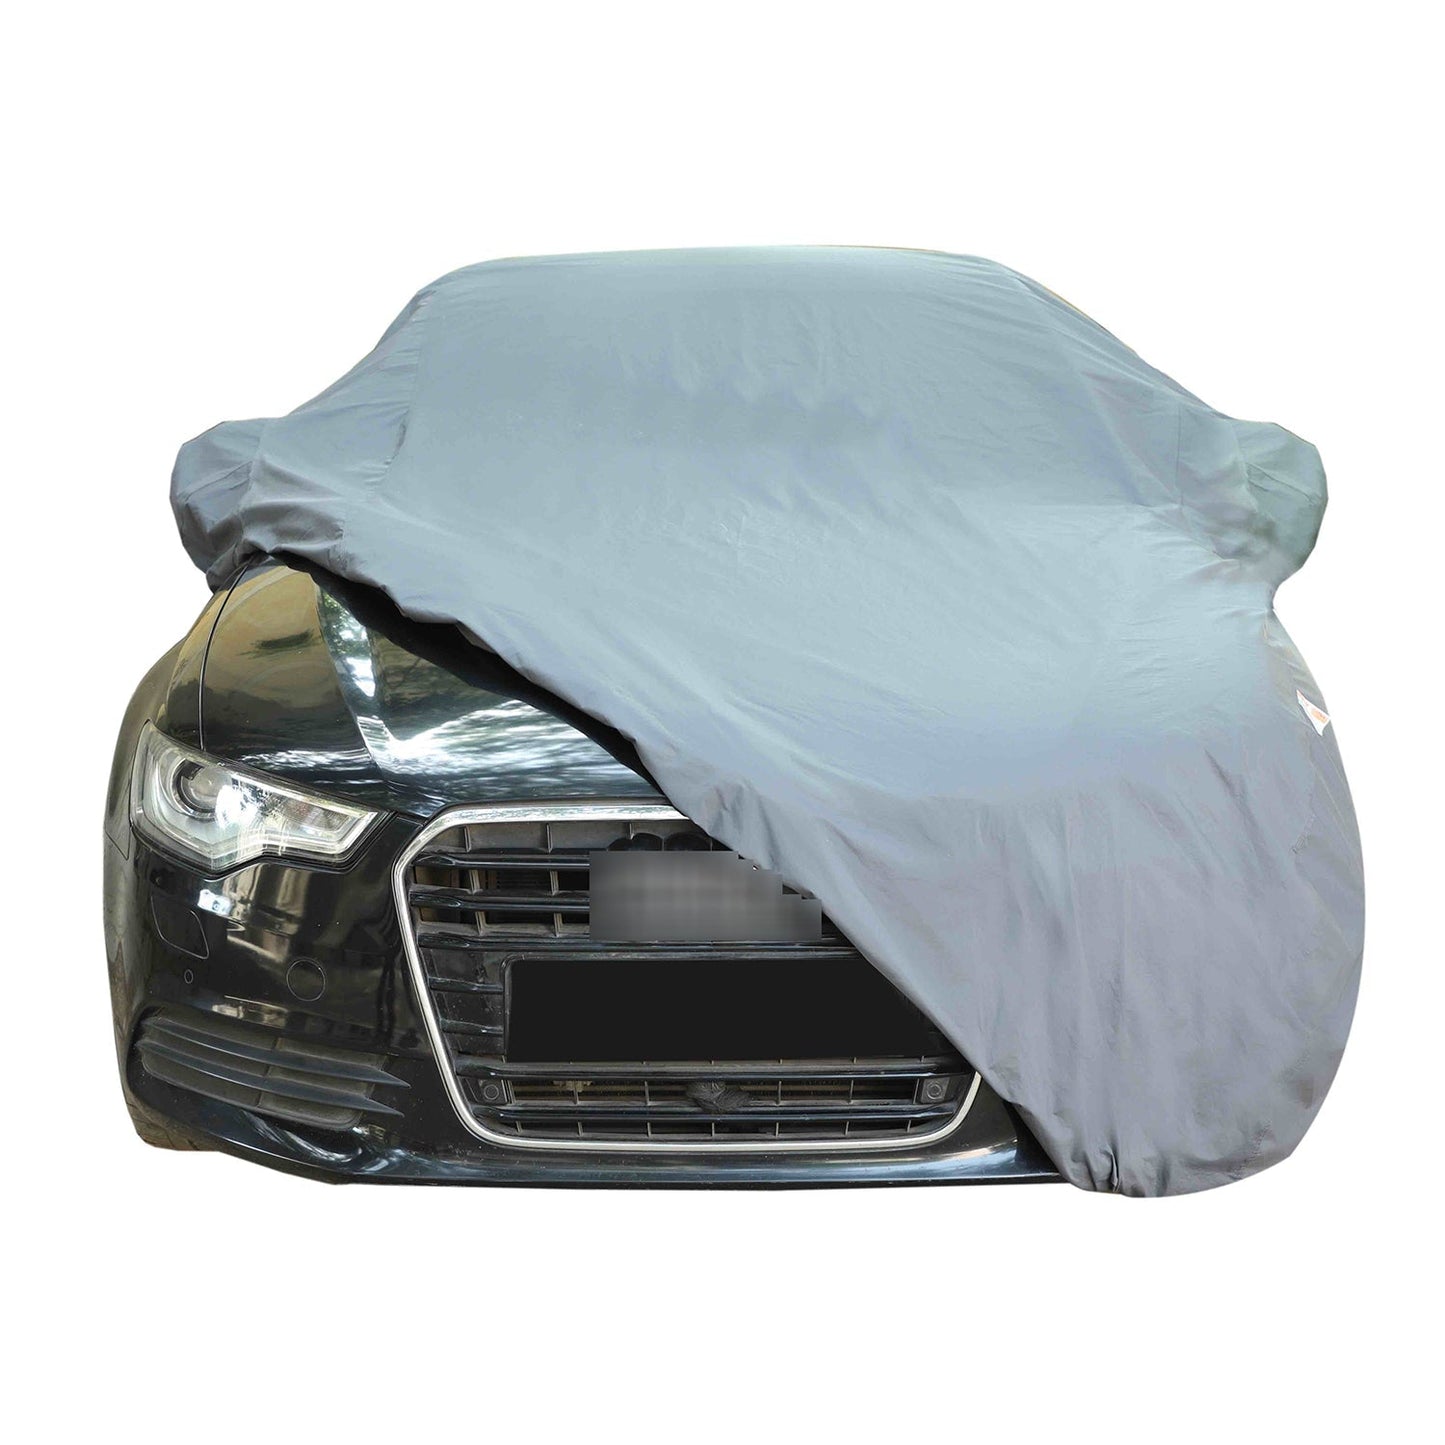 Oshotto Dark Grey 100% Anti Reflective, dustproof and Water Proof Car Body Cover with Mirror Pockets For Fiat Avventura